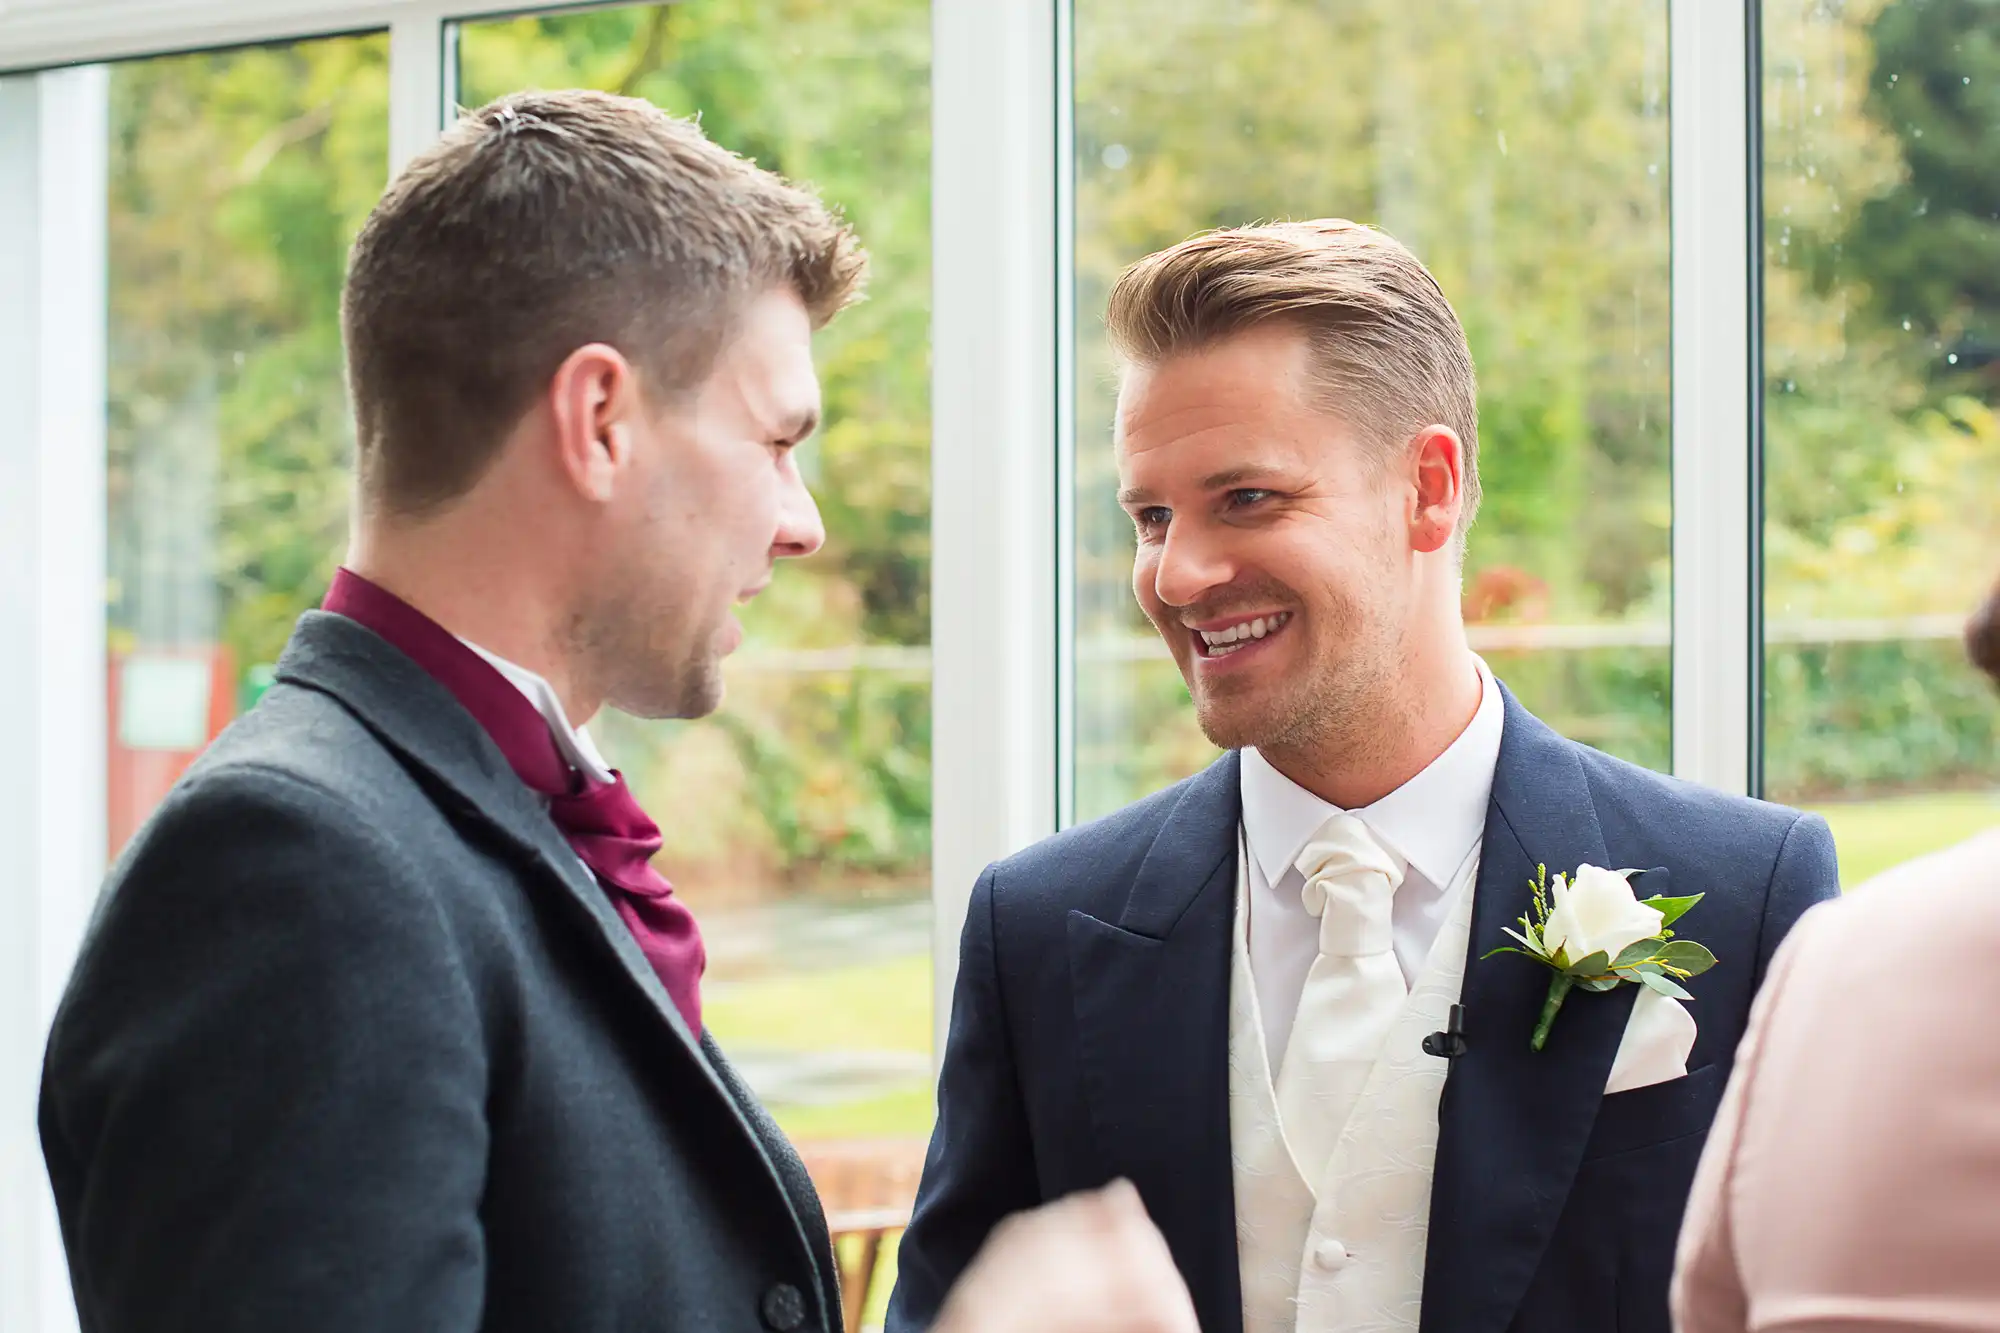 Two men in formal attire smiling and conversing indoors near a window during a daytime event. one wears a boutonniere.